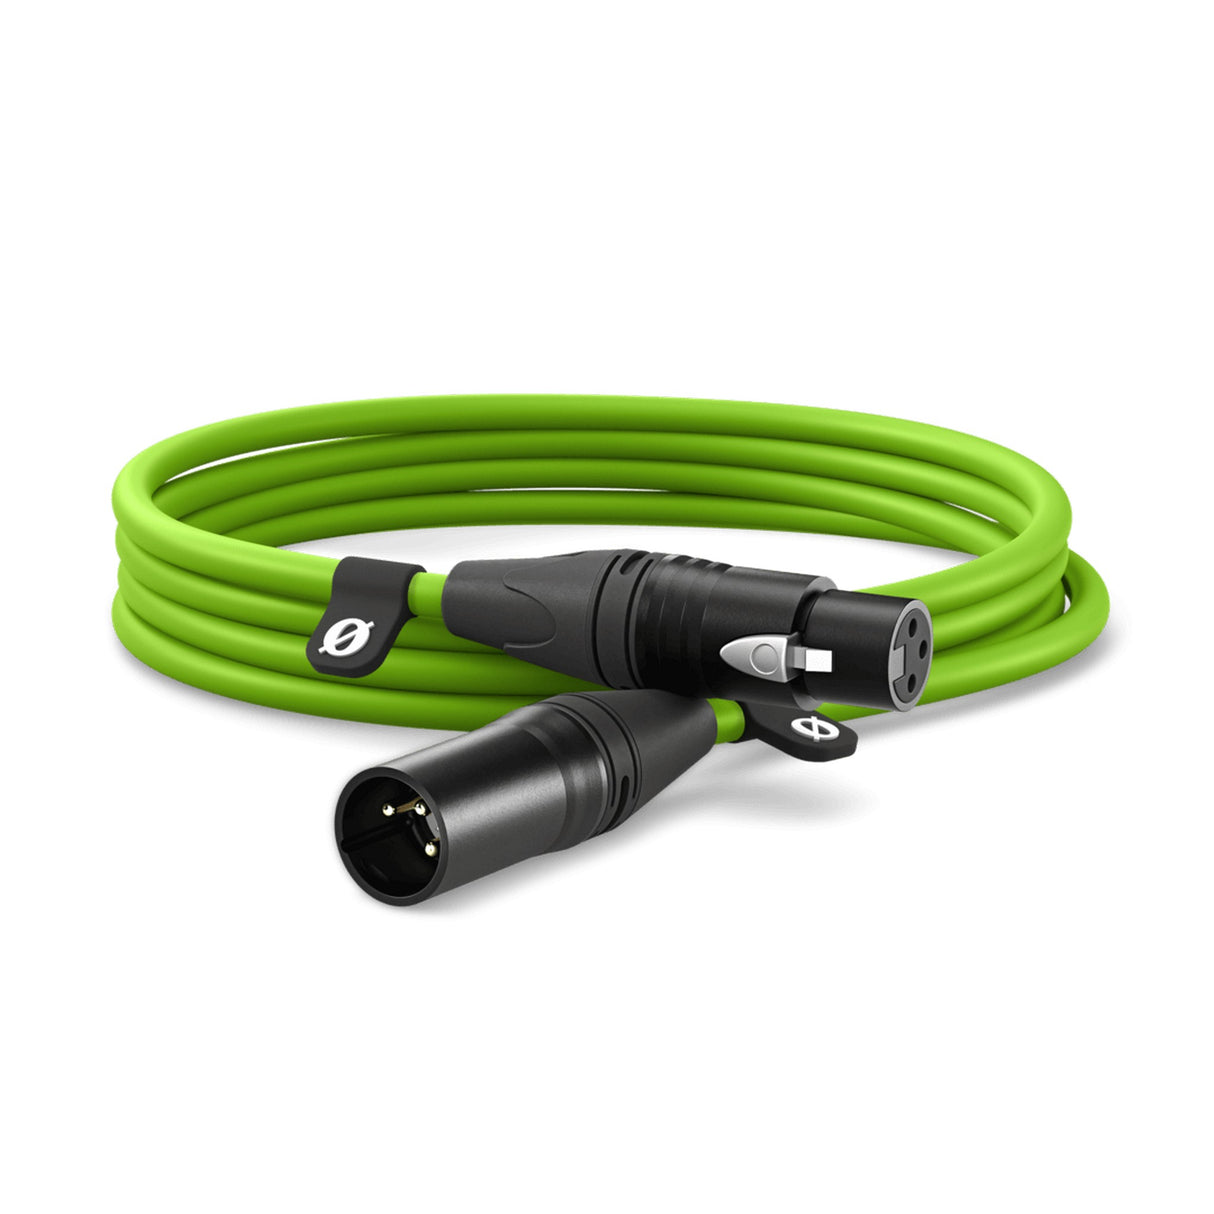 RODE XLR-3 3-Foot Premium Male to Female XLR Cable, Green